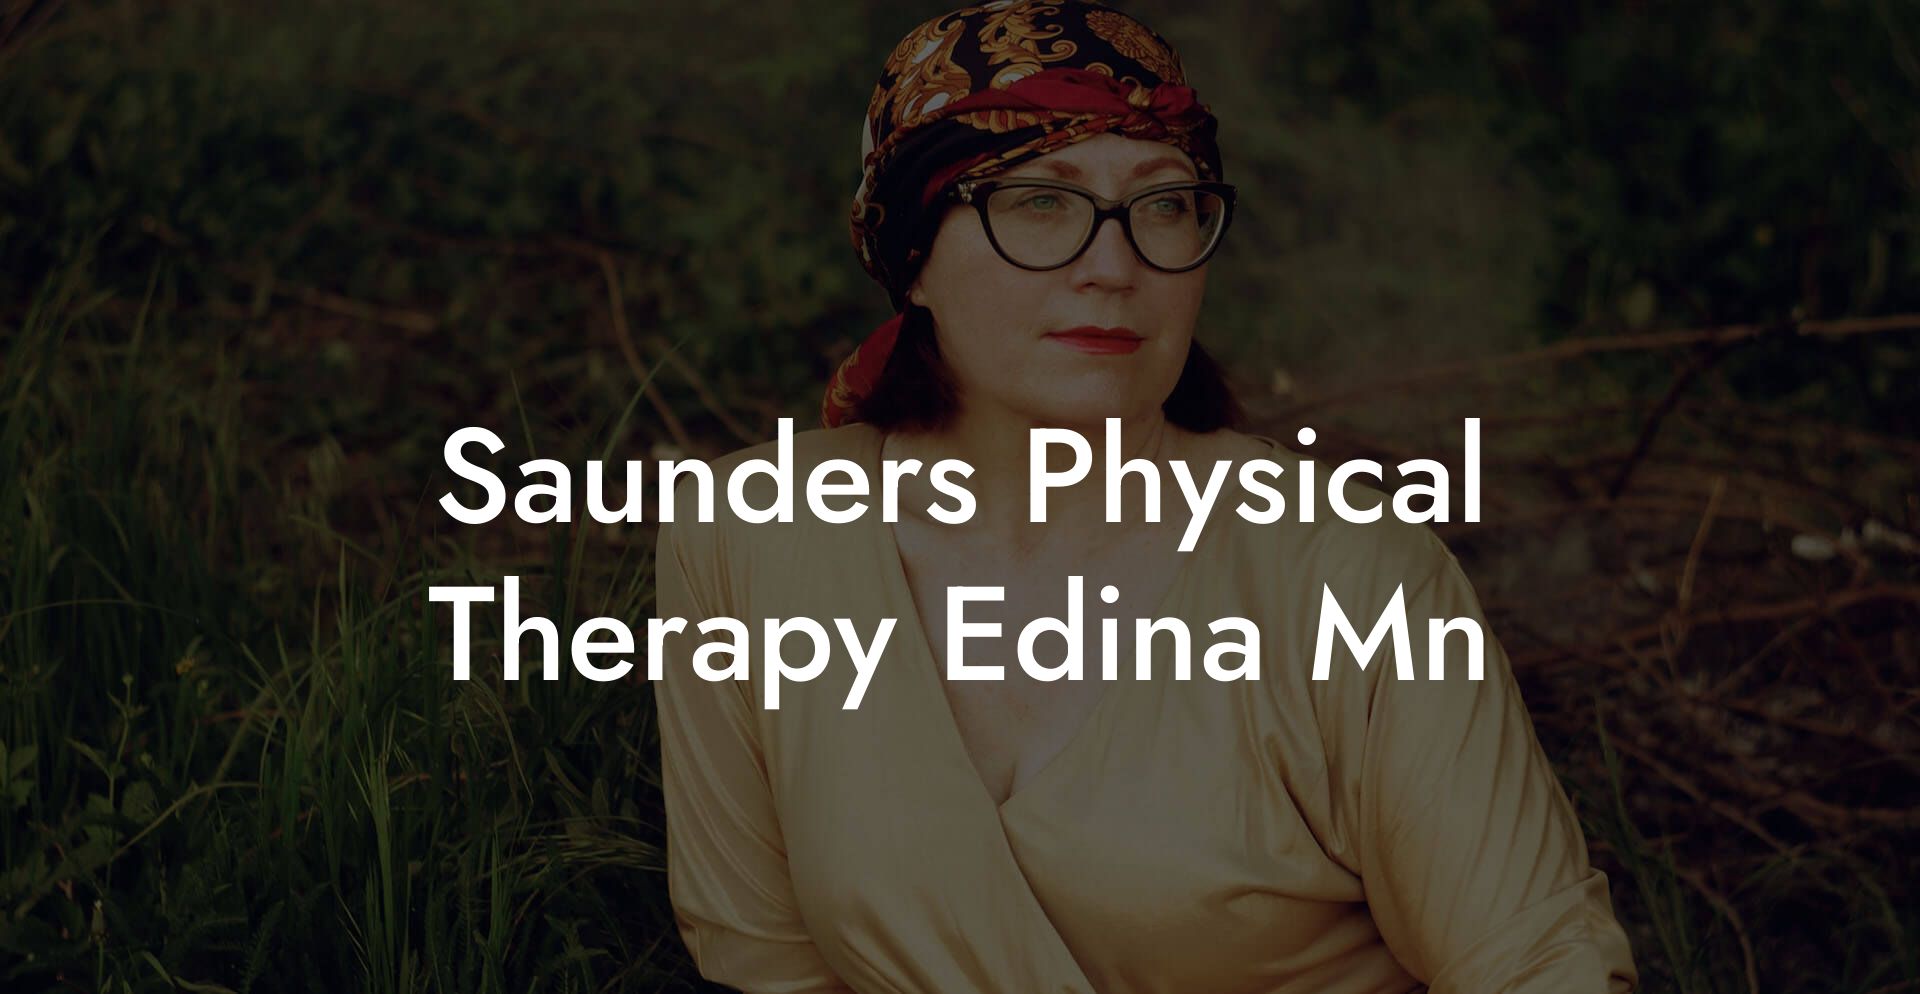 Saunders Physical Therapy Edina Mn